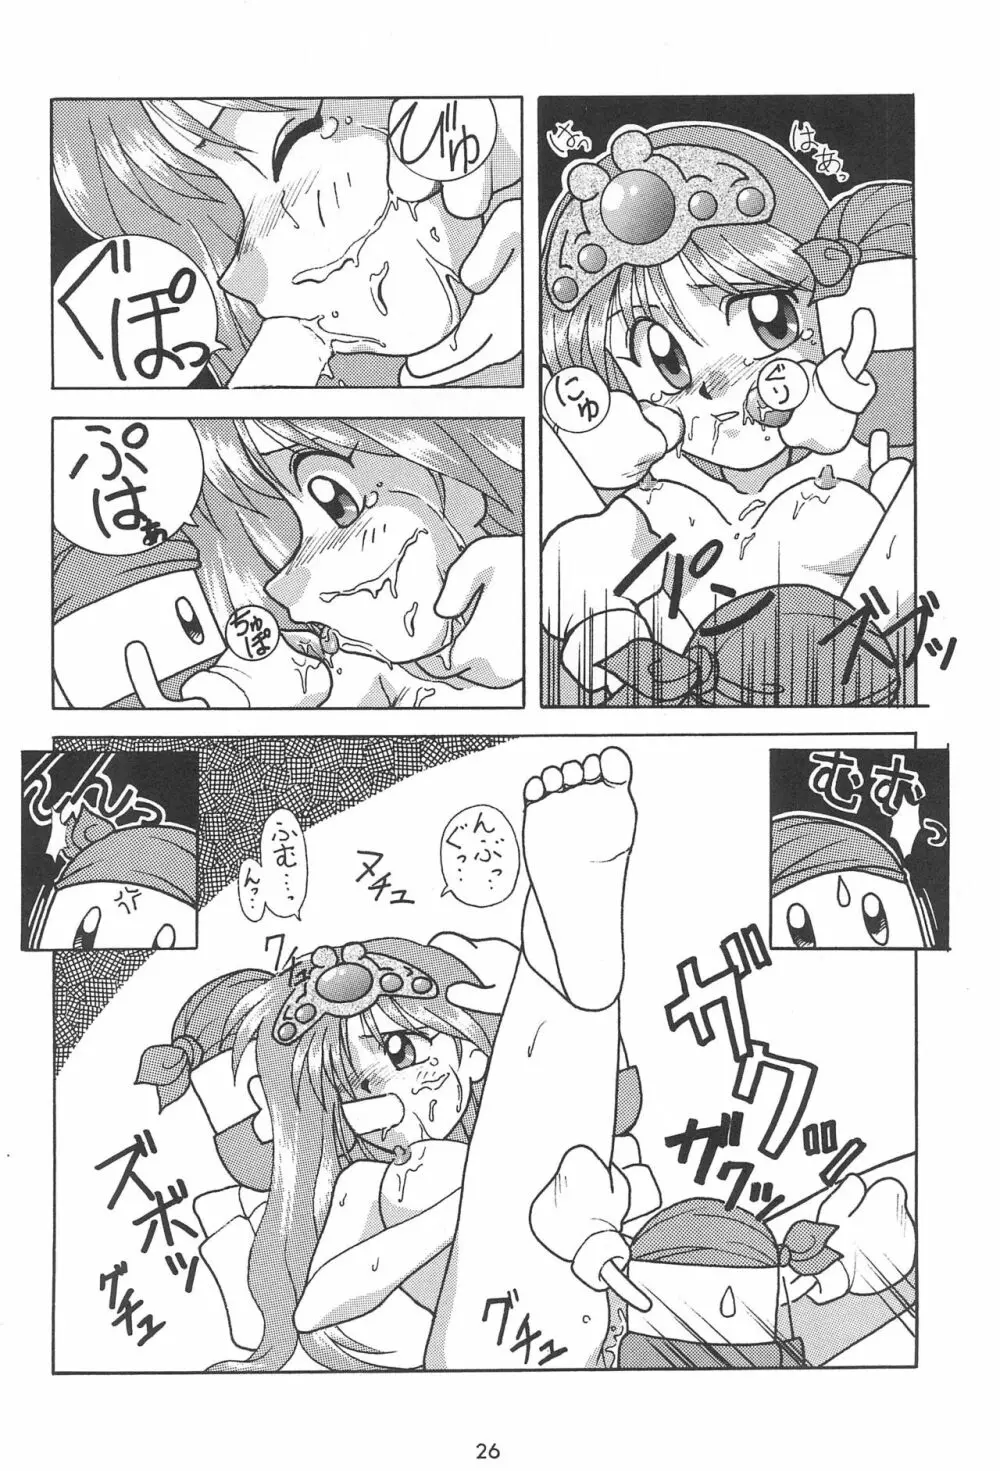 A Page.26